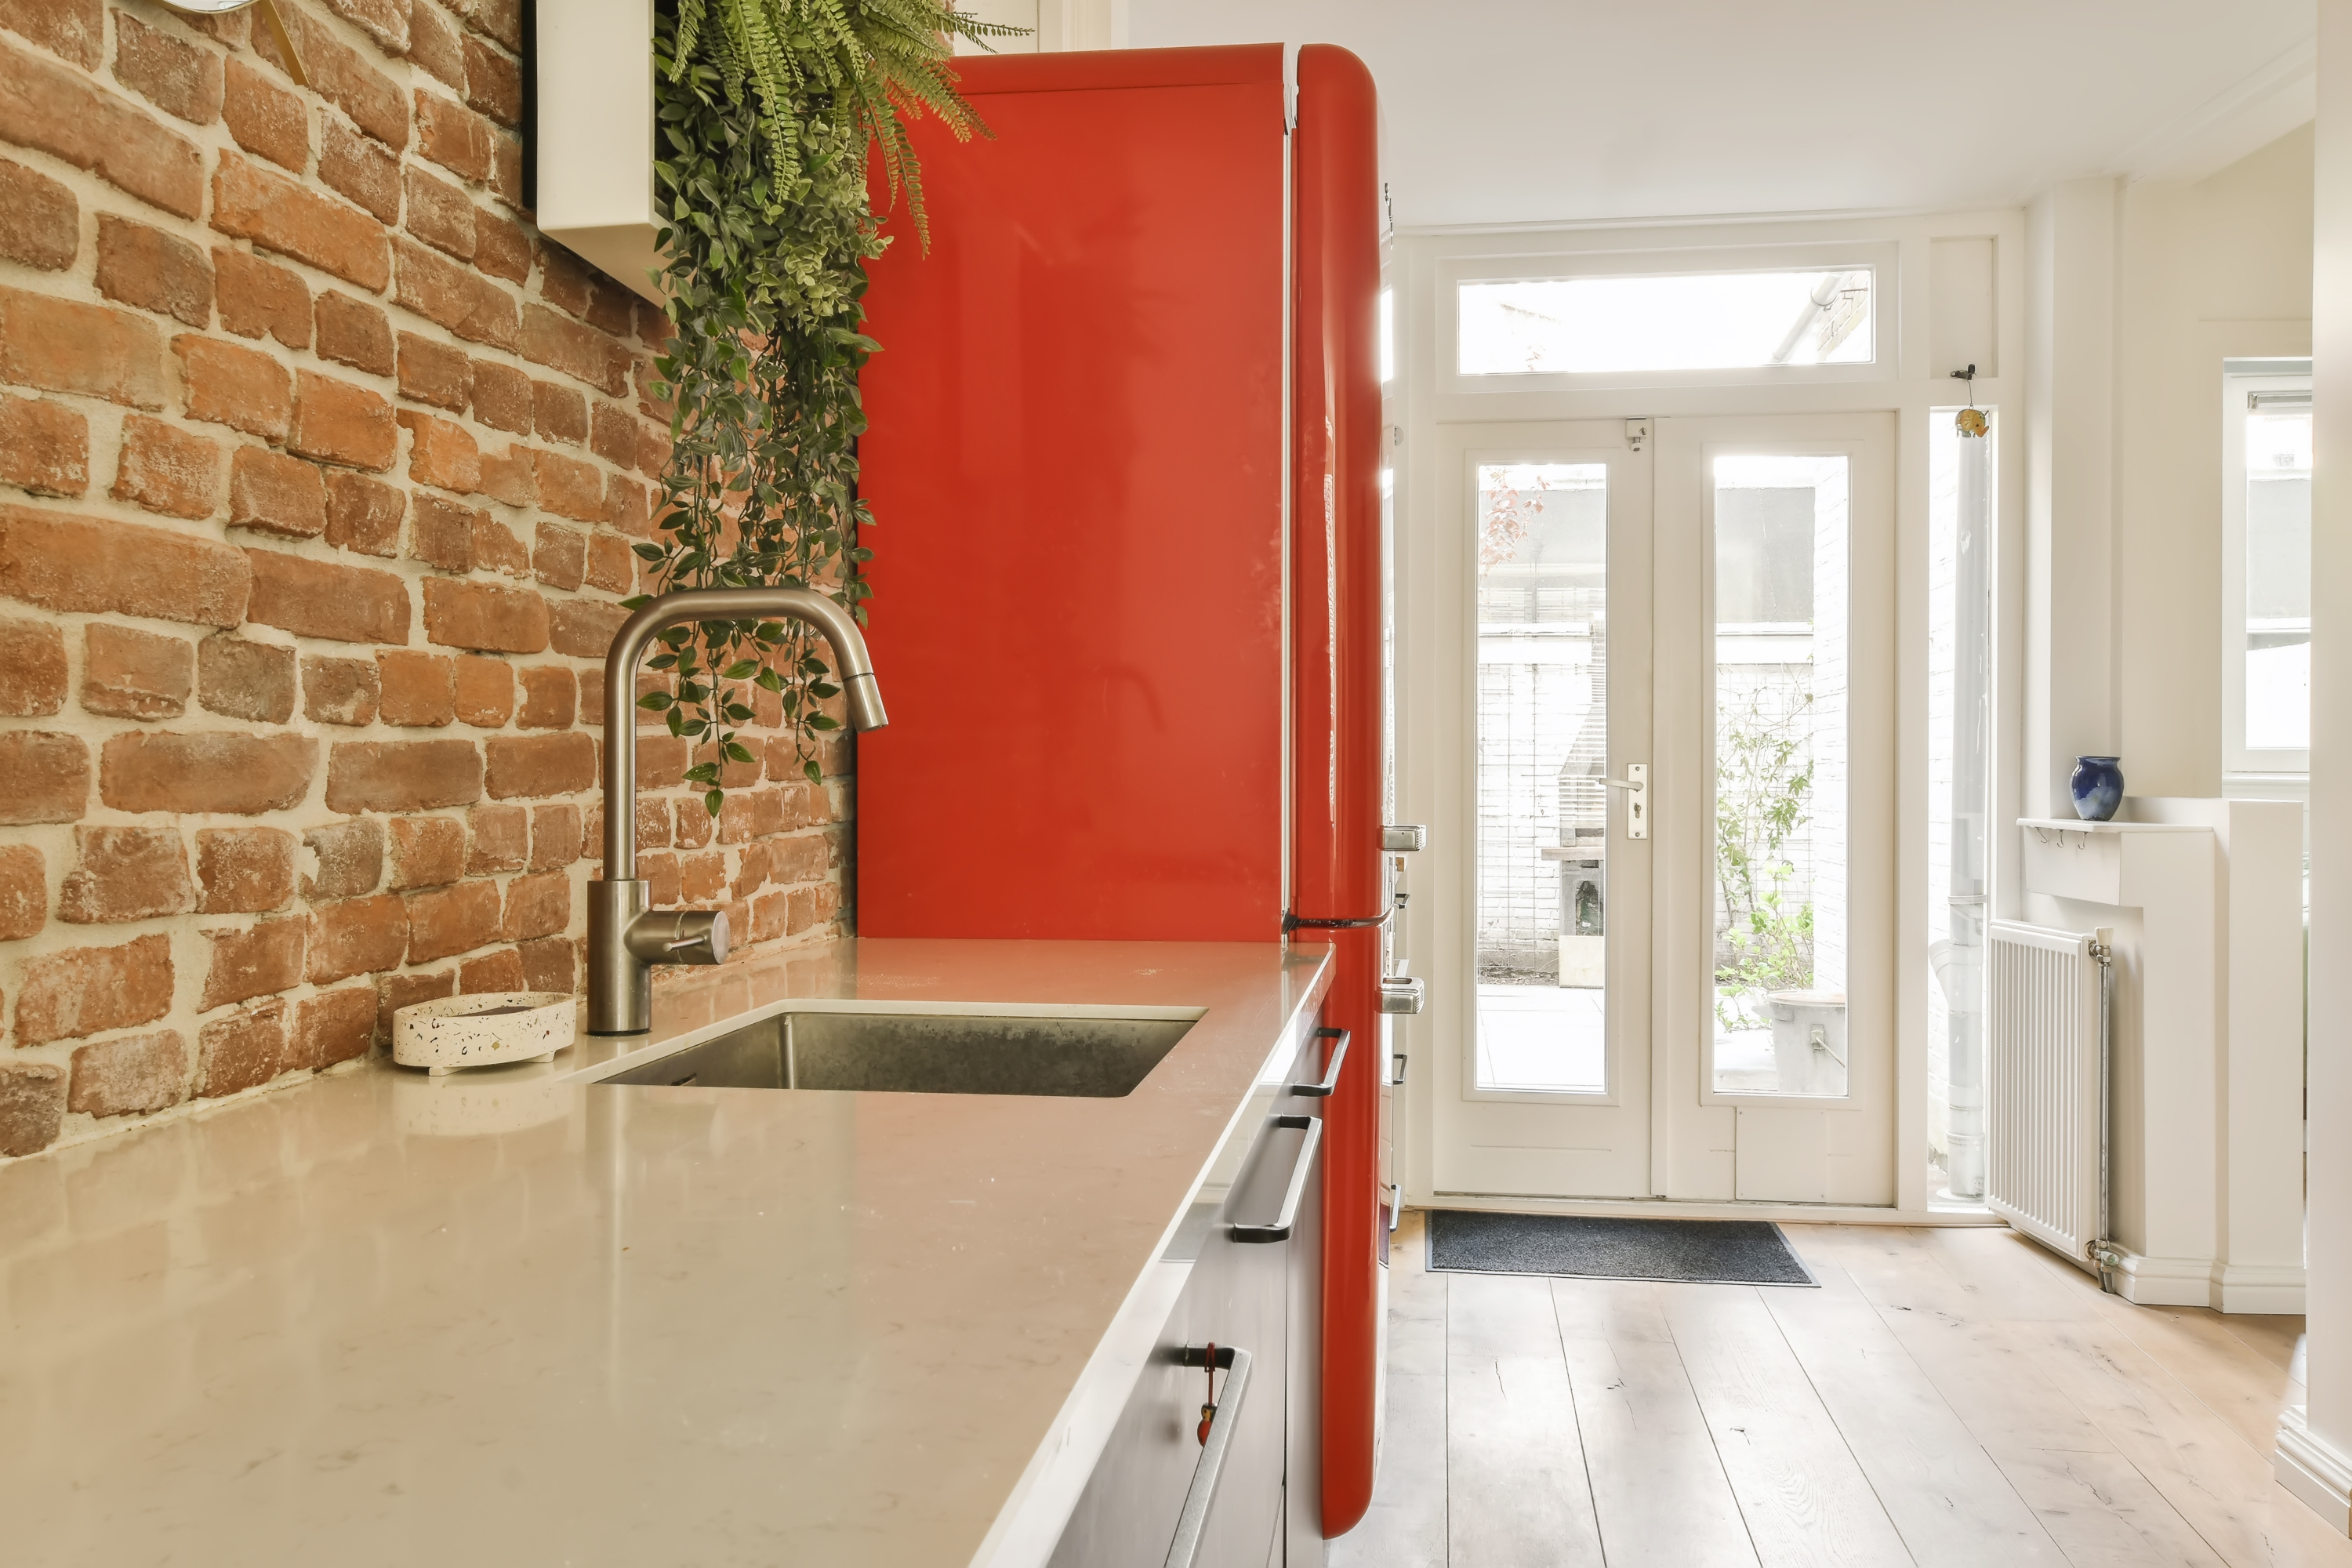 Modern kitchen with a red retro-style refrigerator and exposed brick wall